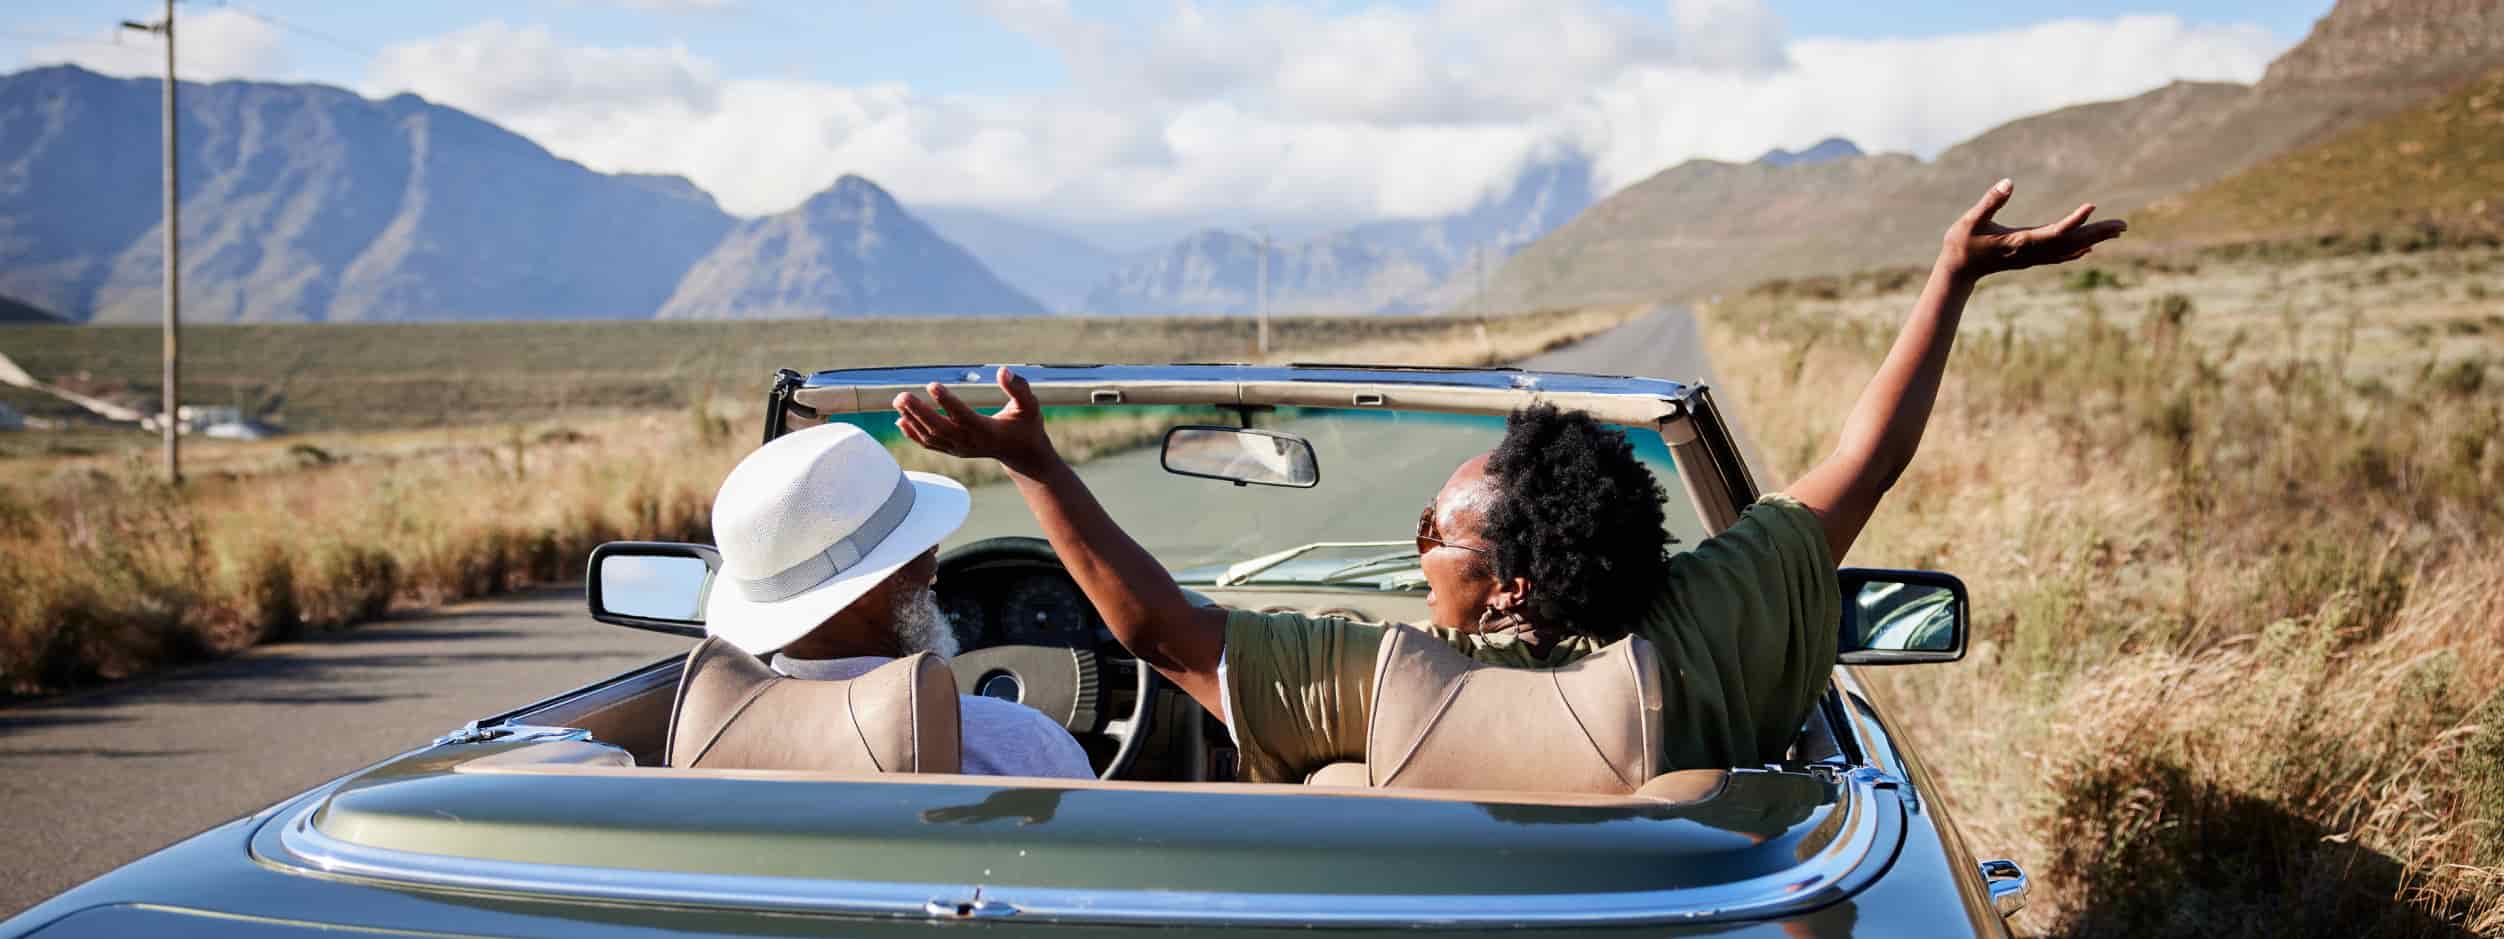 Two people road trip through the desert joyfully in a convertible.